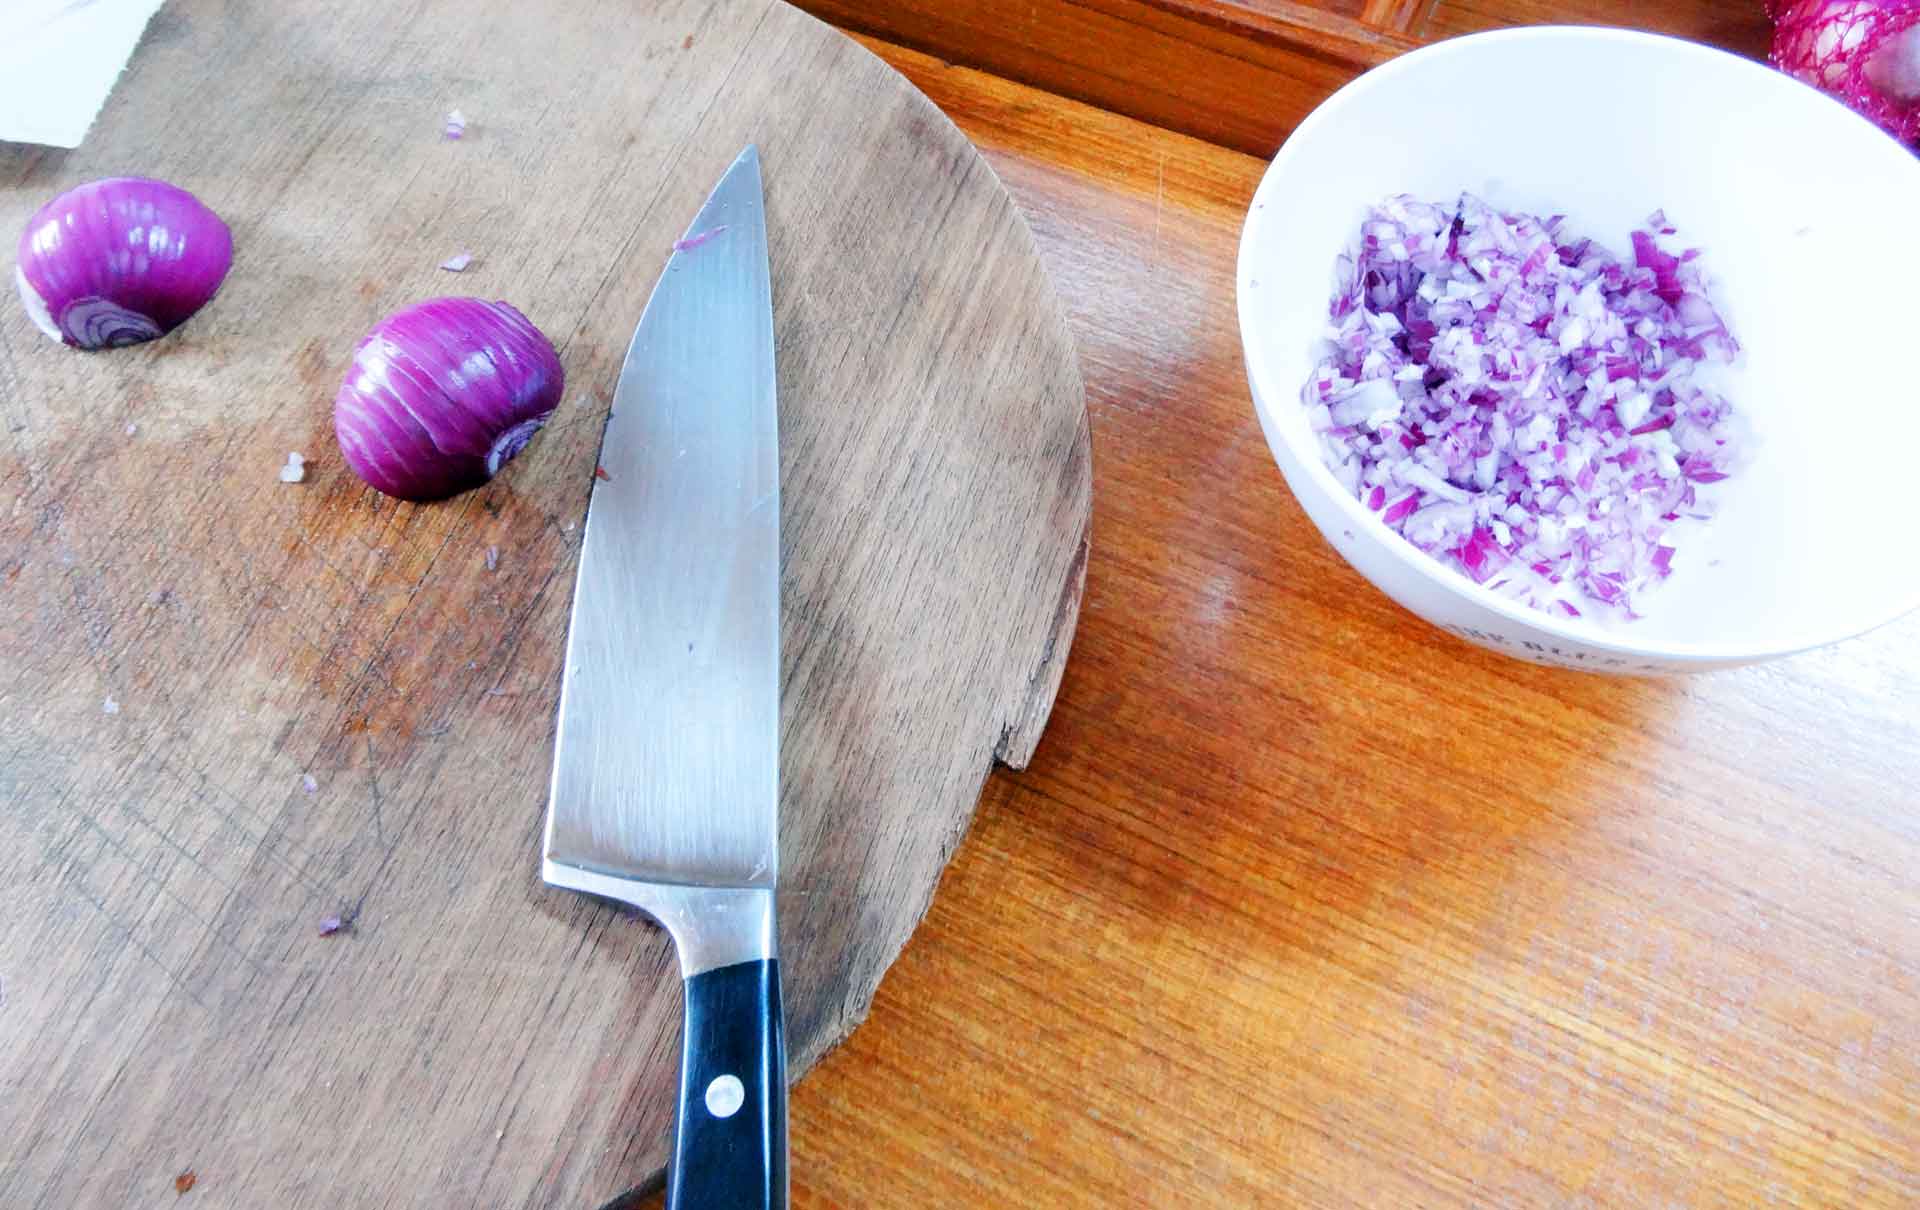 Chopping the Onions. Take Care of your Eyes ...